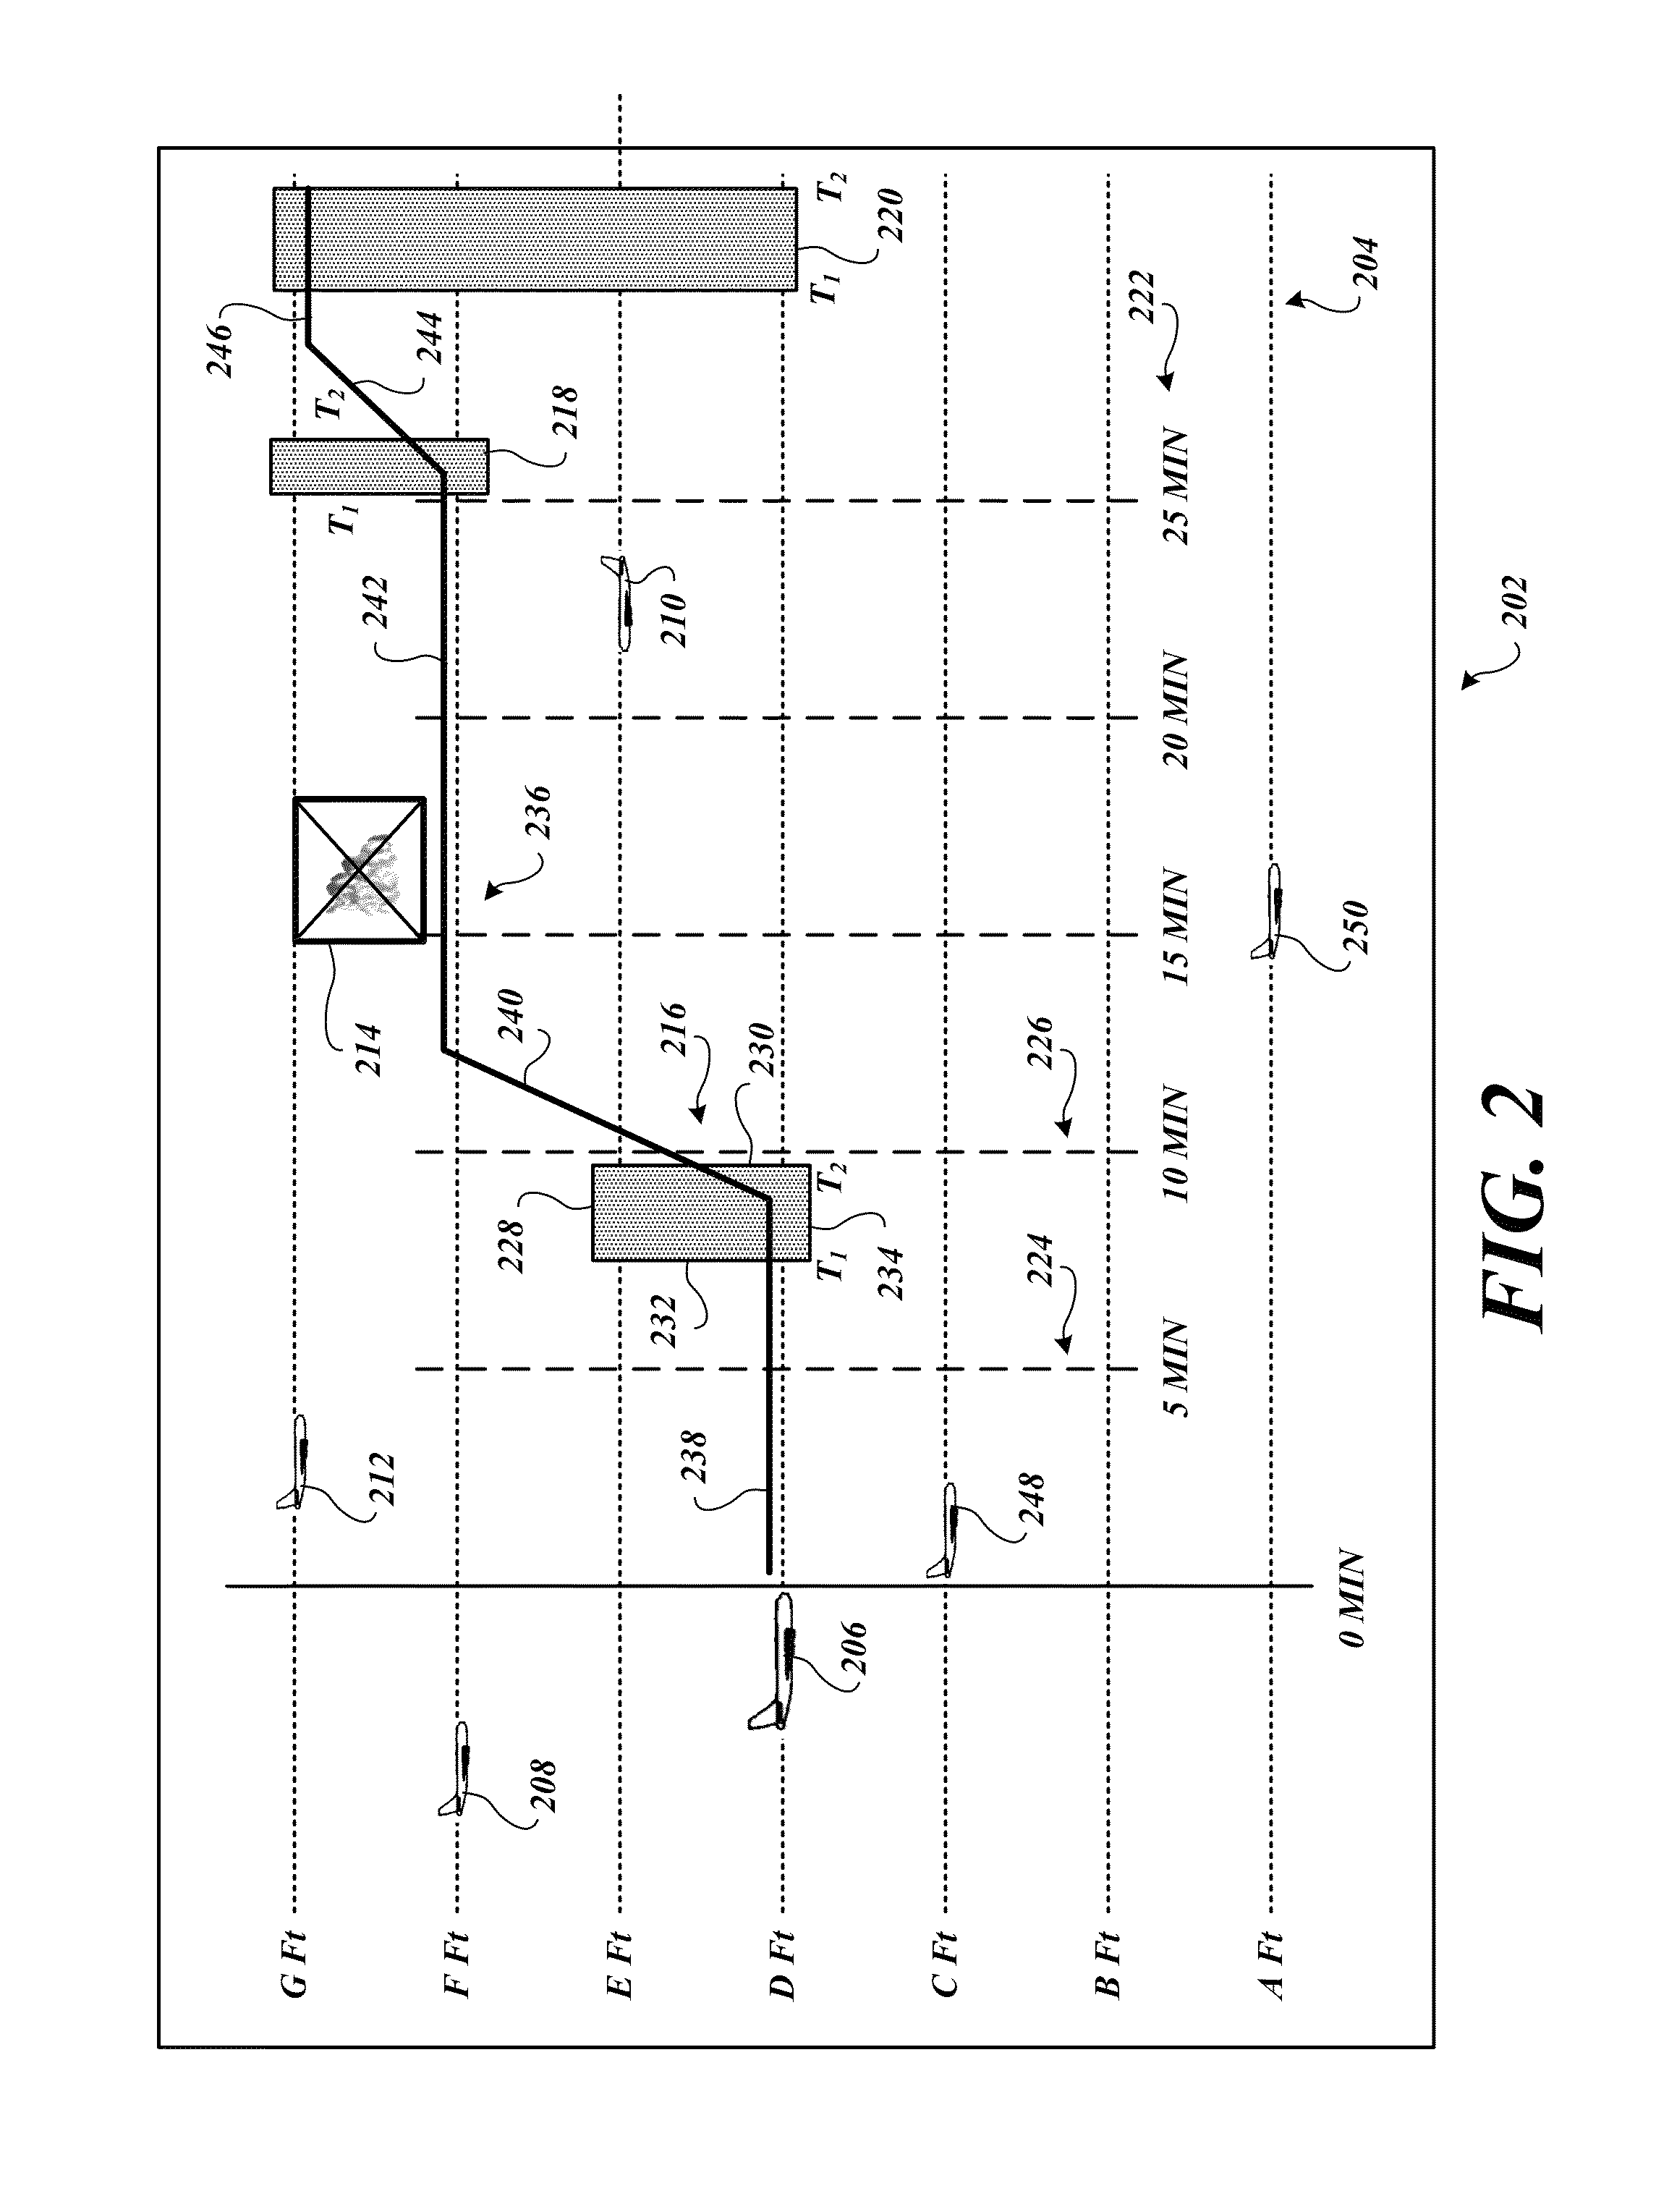 Systems and methods for in-trail opportunity window estimator